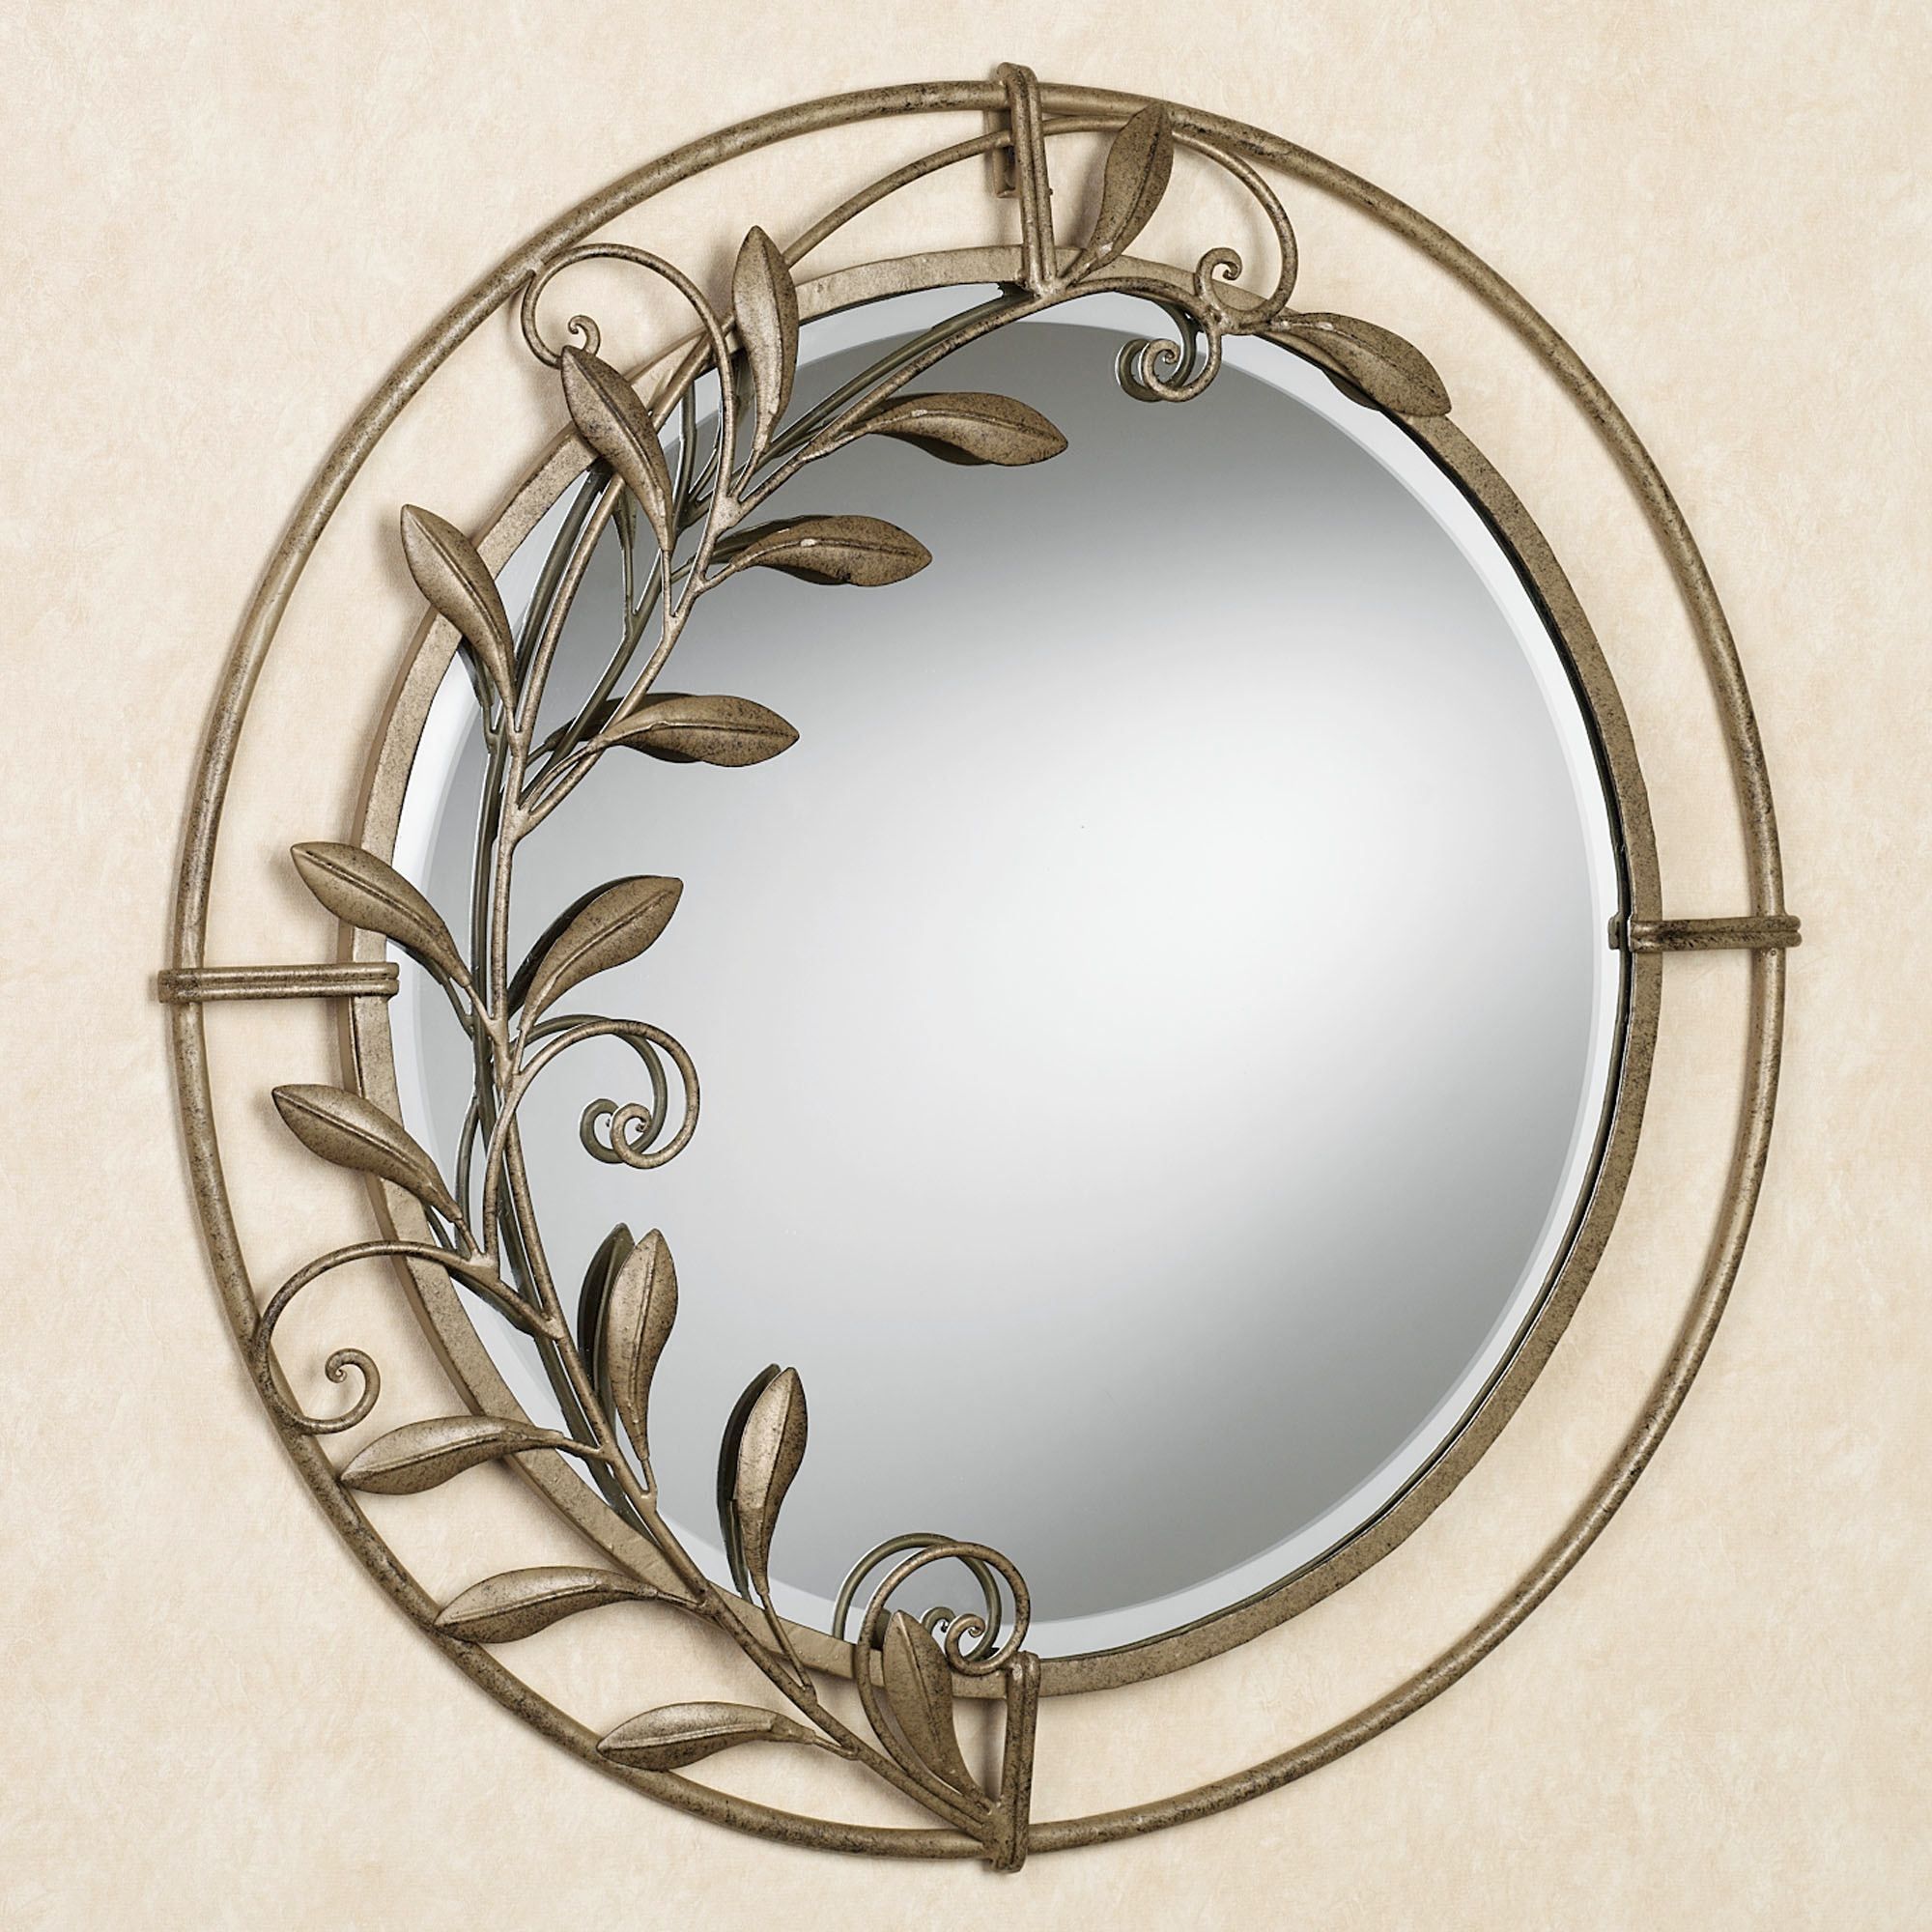 Galeazzo Antique Gold Round Metal Wall Mirror With Gold Rounded Edge Mirrors (View 12 of 15)